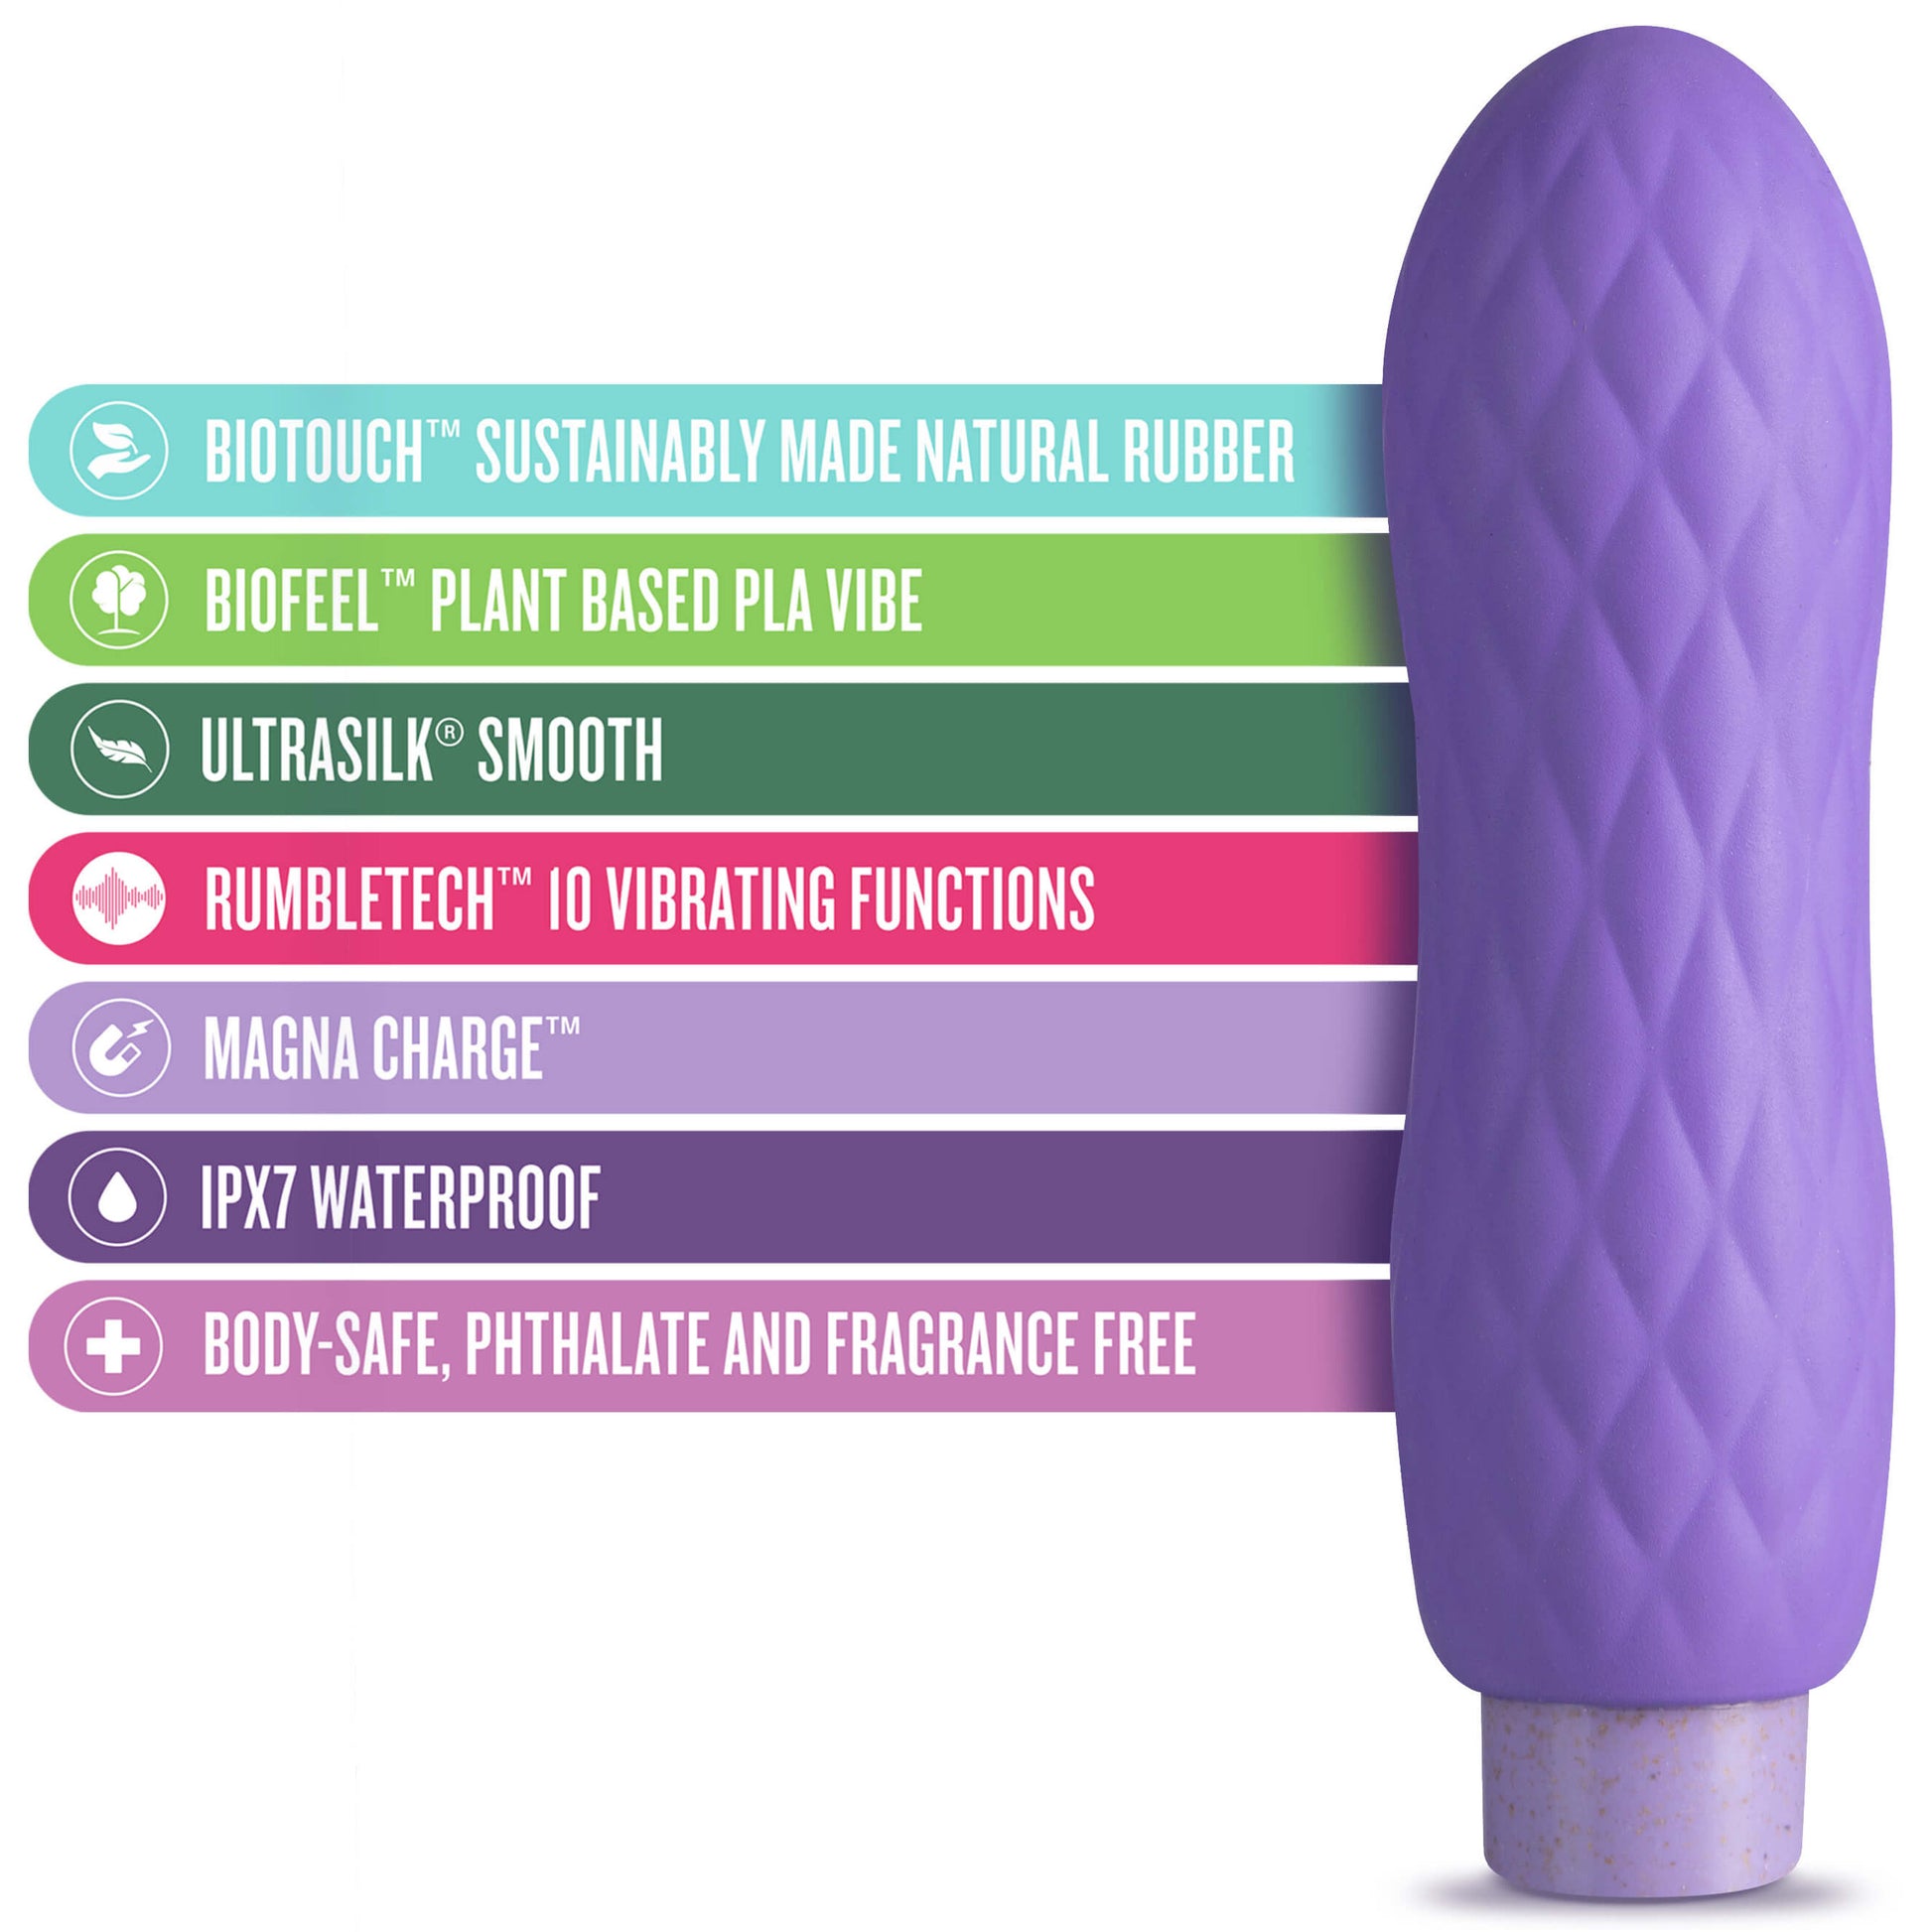 Blush Gaia Eco Bliss freatures - by The Bigger O online sex toy shop. USA, Canada and UK shipping available.